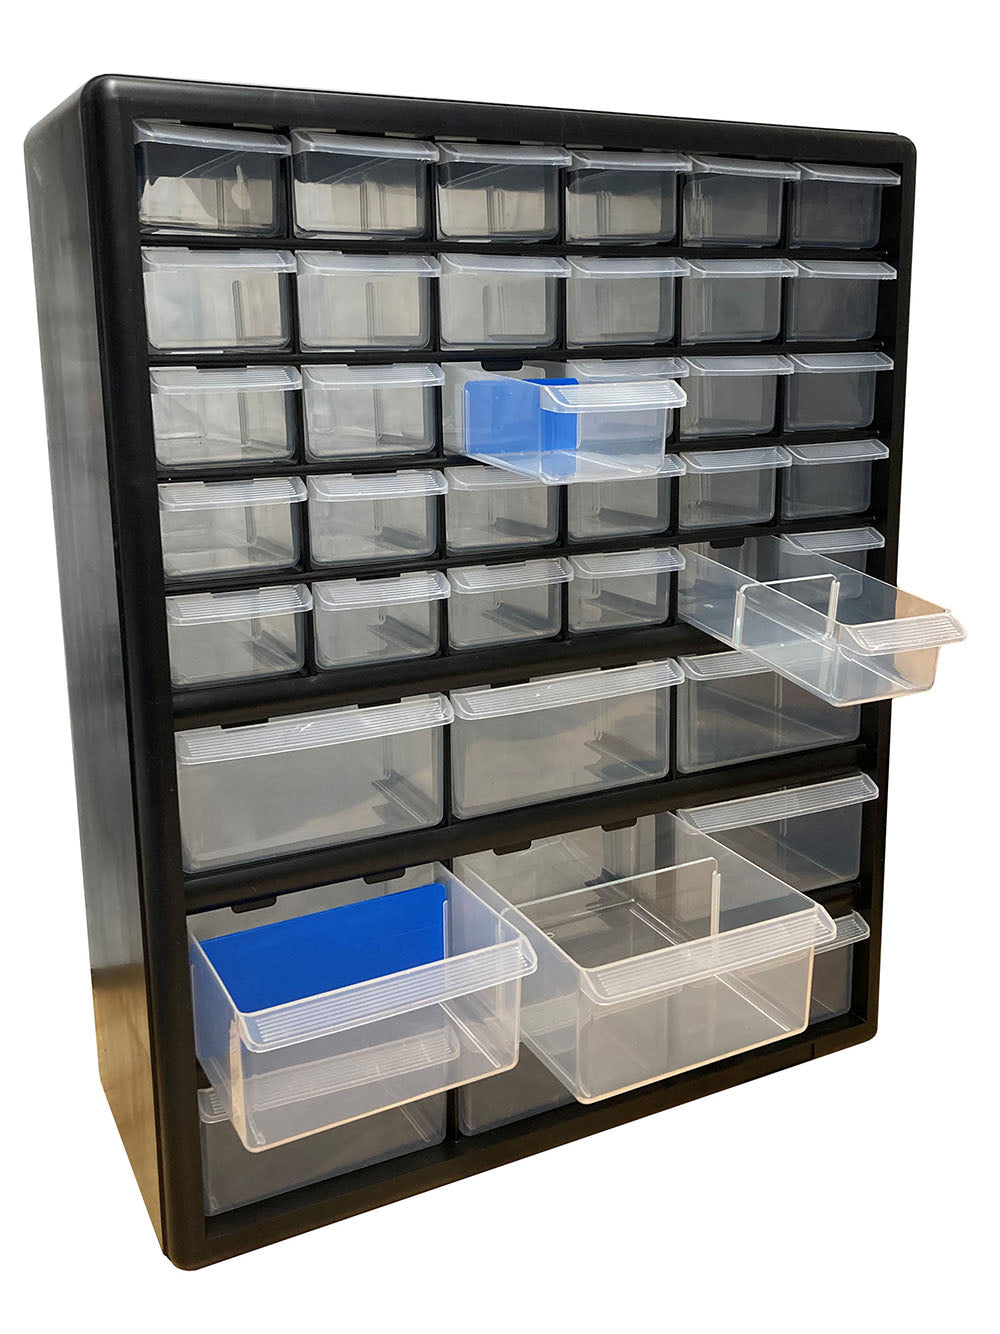 Dividers for Plastic Storage Hardware Cabinet with Drawers, Designed to fit Greenpro Screw and Hardware Organizer with 39 drawers (Model: 3309). Pack of 15 small and 5 large dividers